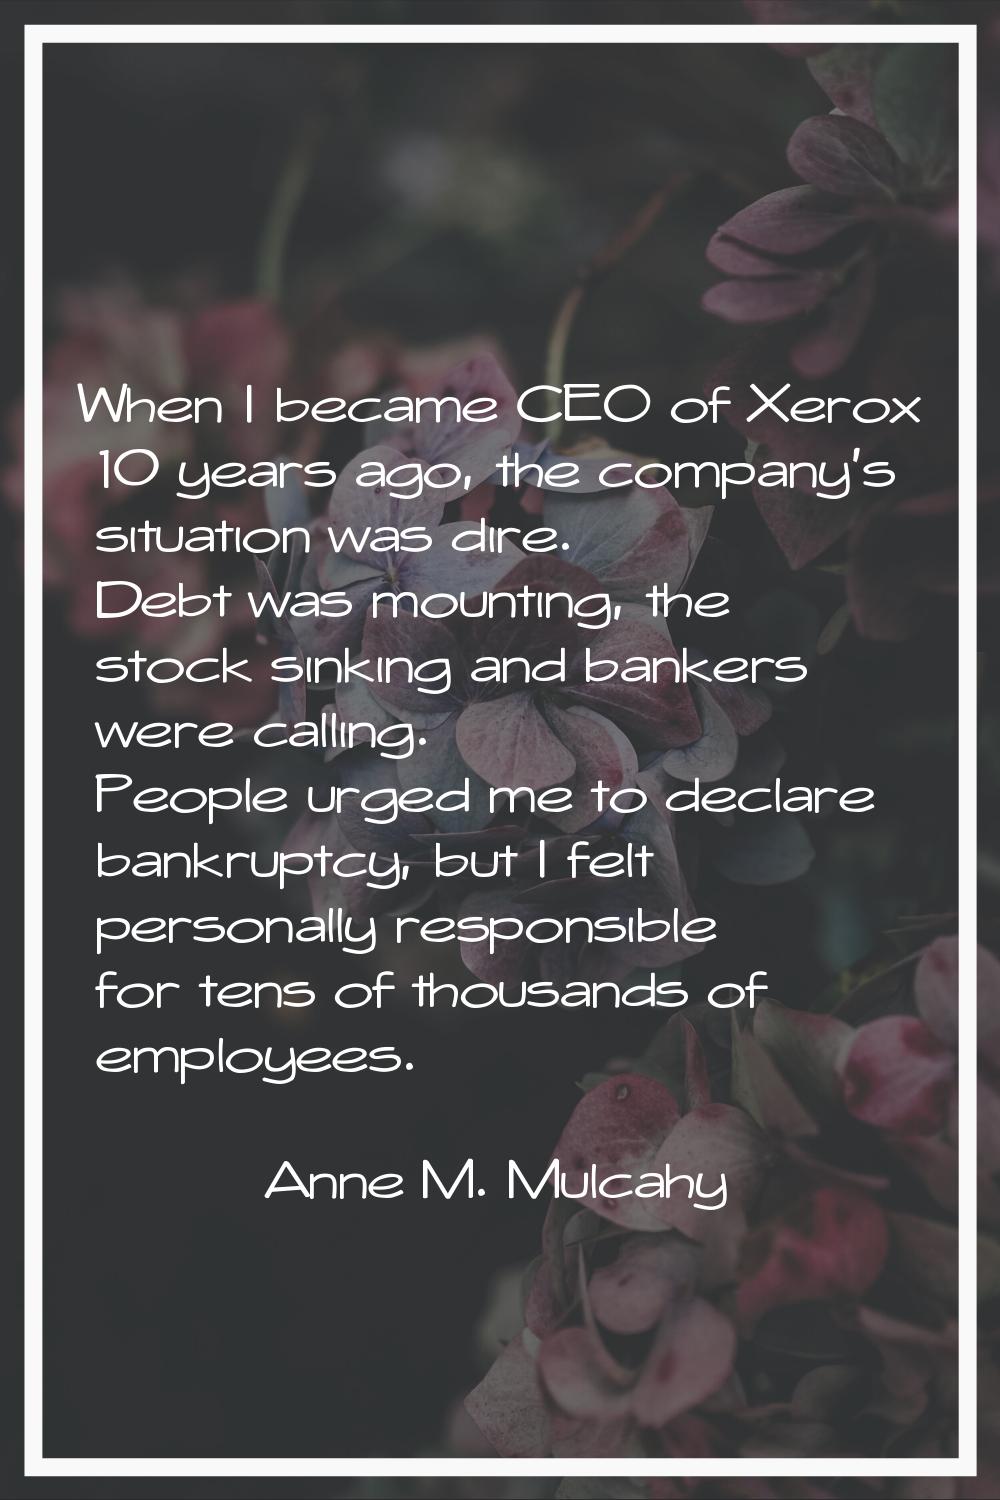 When I became CEO of Xerox 10 years ago, the company's situation was dire. Debt was mounting, the s